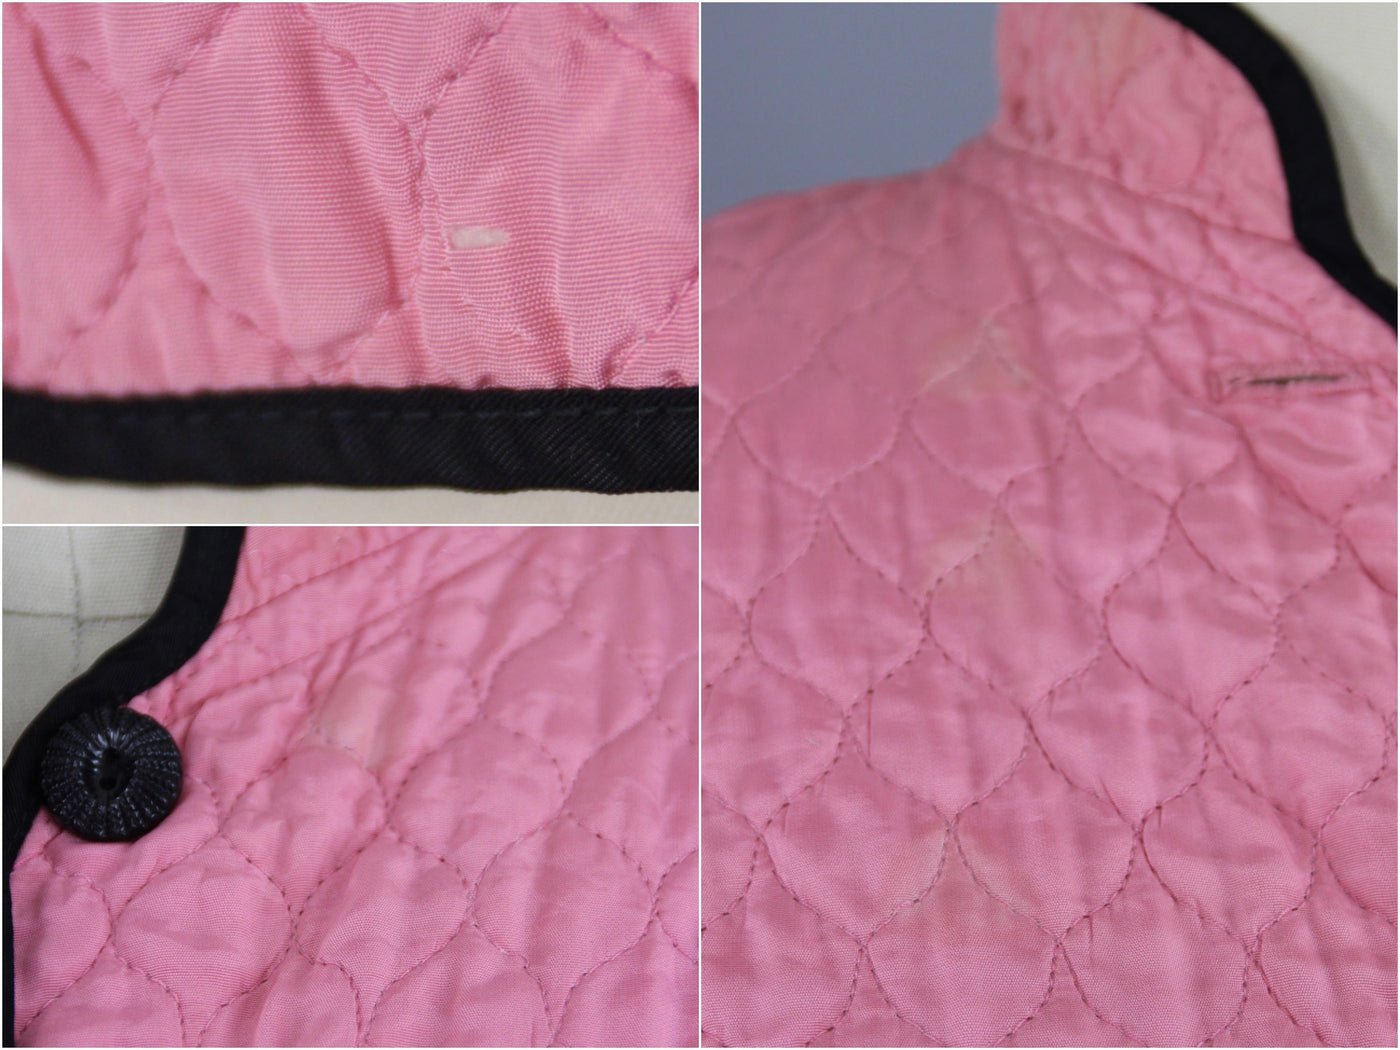 Vintage 1940s Bed Jacket / Carnation Pink Quilted Rayon - ThisBlueBird